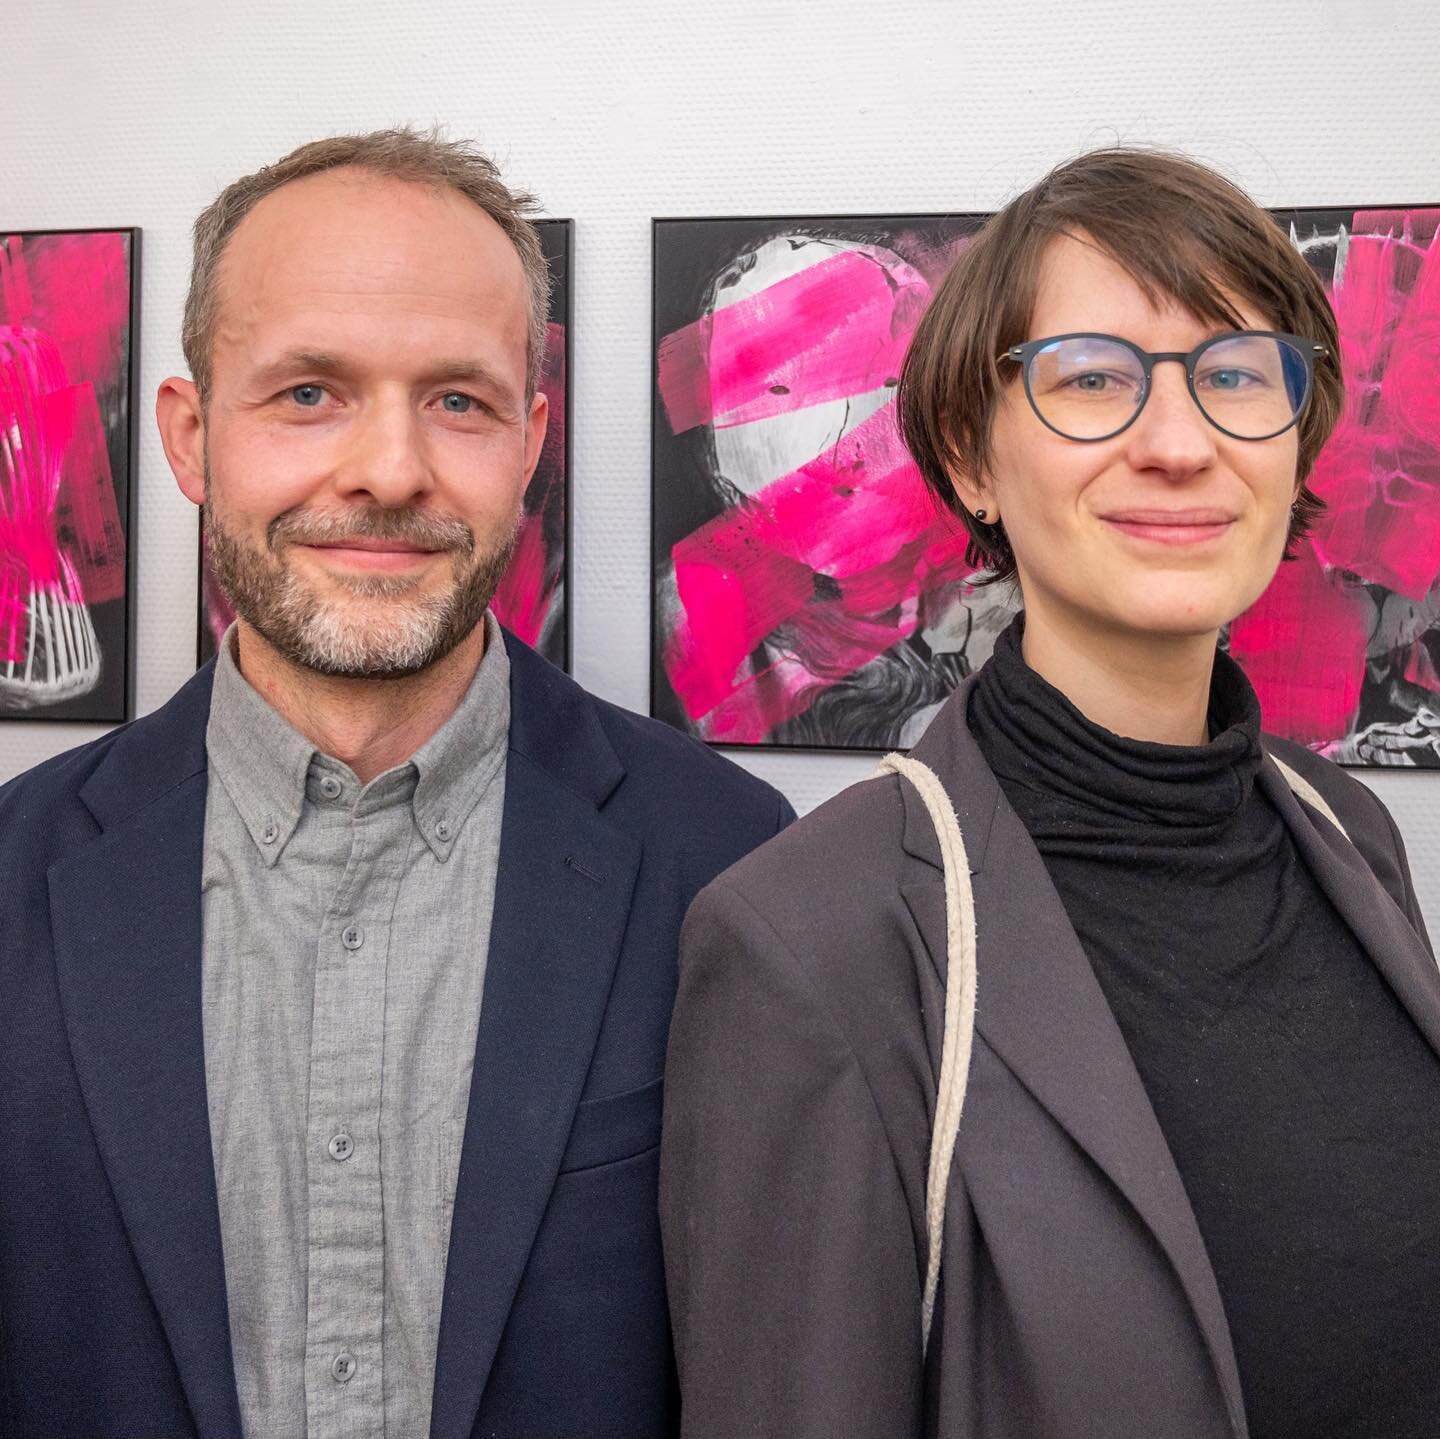 For the show &bdquo;drawing and friends&ldquo;, my friend @c.d.herrmann followed my invitation to Augsburg, where we both showed our (pink) work at @eckegalerie. Thank you, @janaschwindel, for the organisation and curation! 

It might have been the b